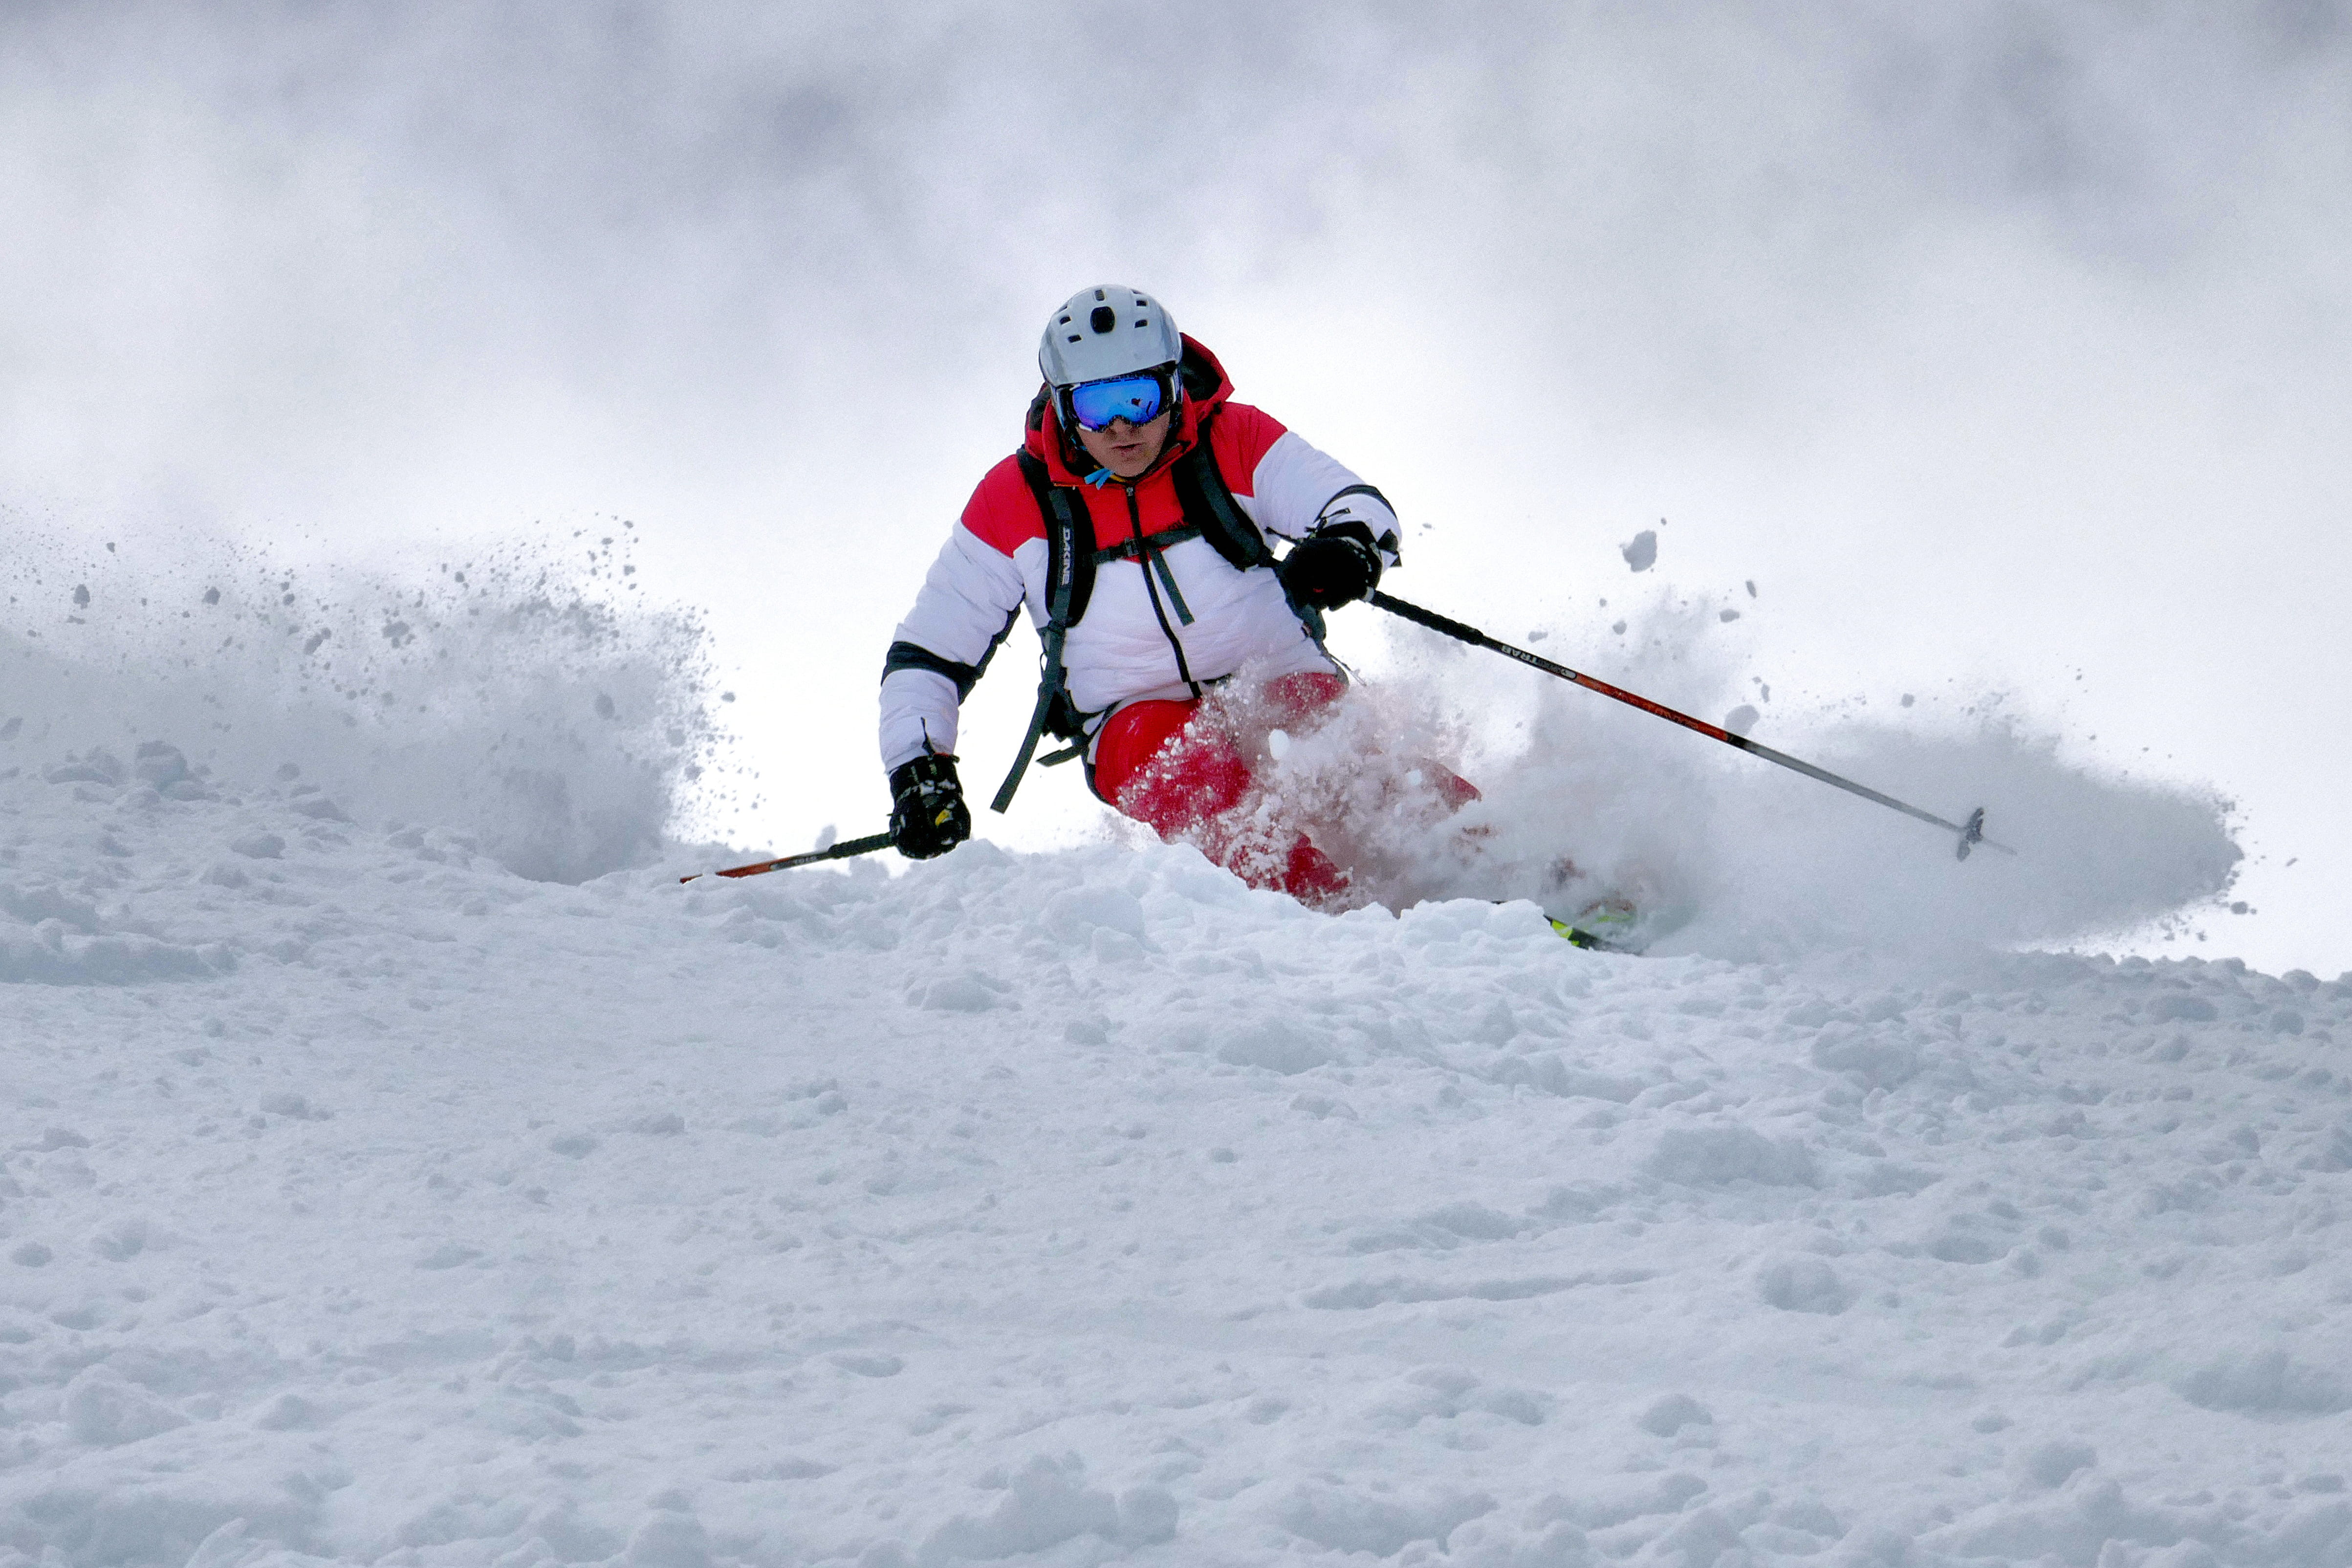 man skiing on snow, outdoors, nature, human, person, sport, sports